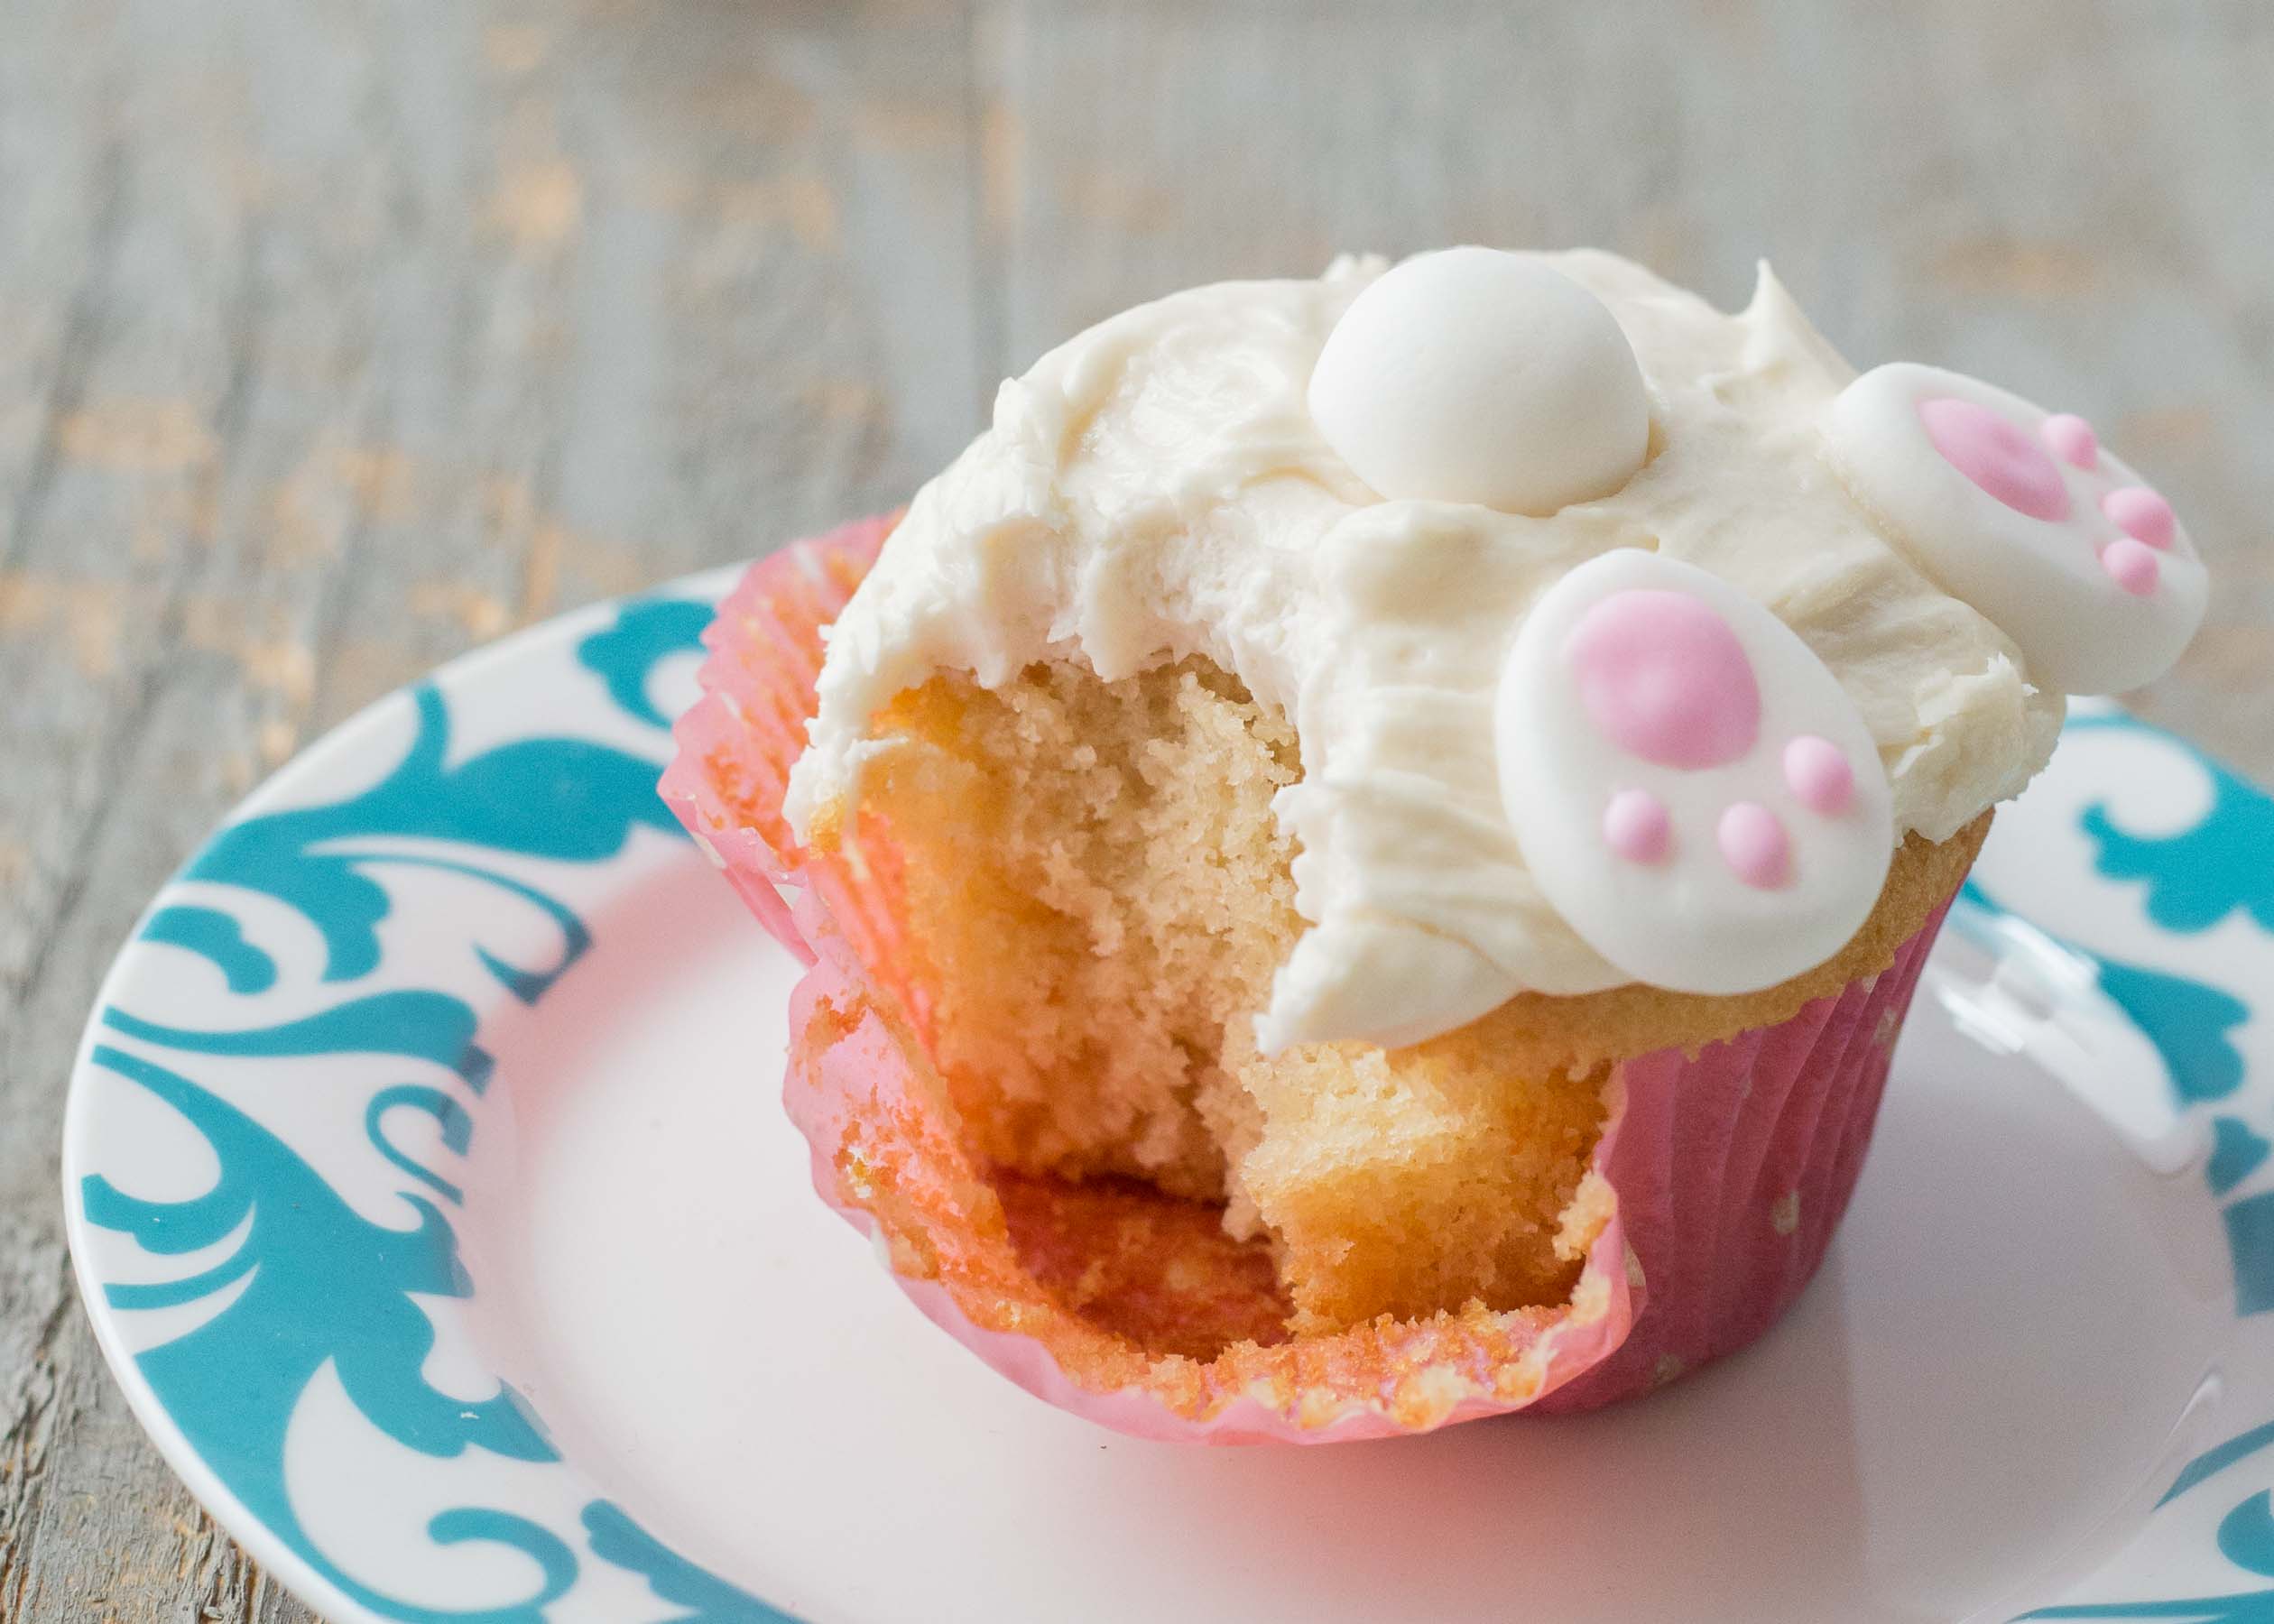 Super-Simple Easter Treat Ideas To Make With Kids